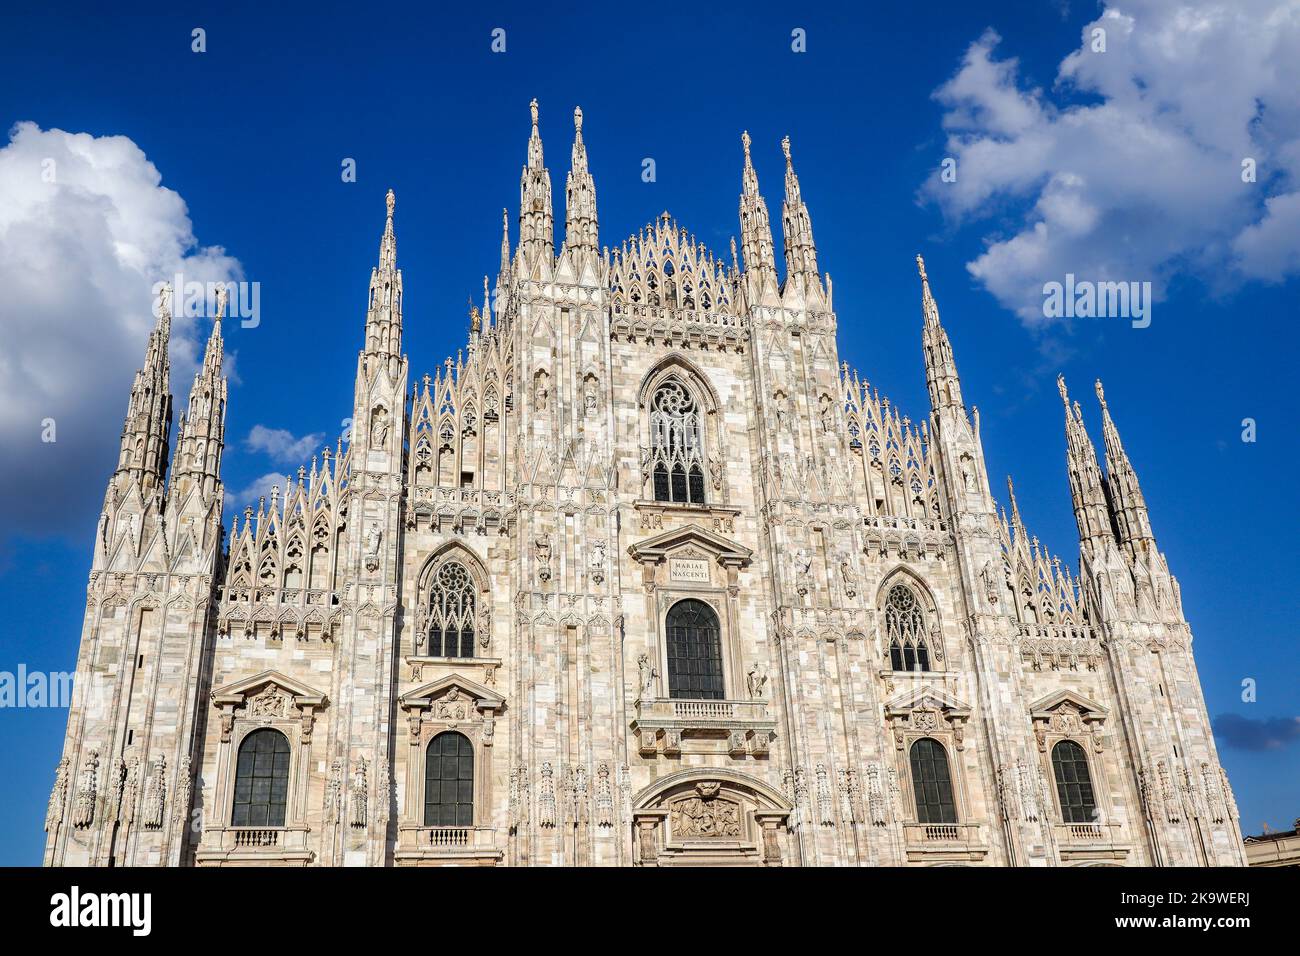 Cathedral Duomo di Milano in Italy. Beautiful Architectural Landmark in Northern Italy. Historic Building with Blue Sky with Clouds. Stock Photo